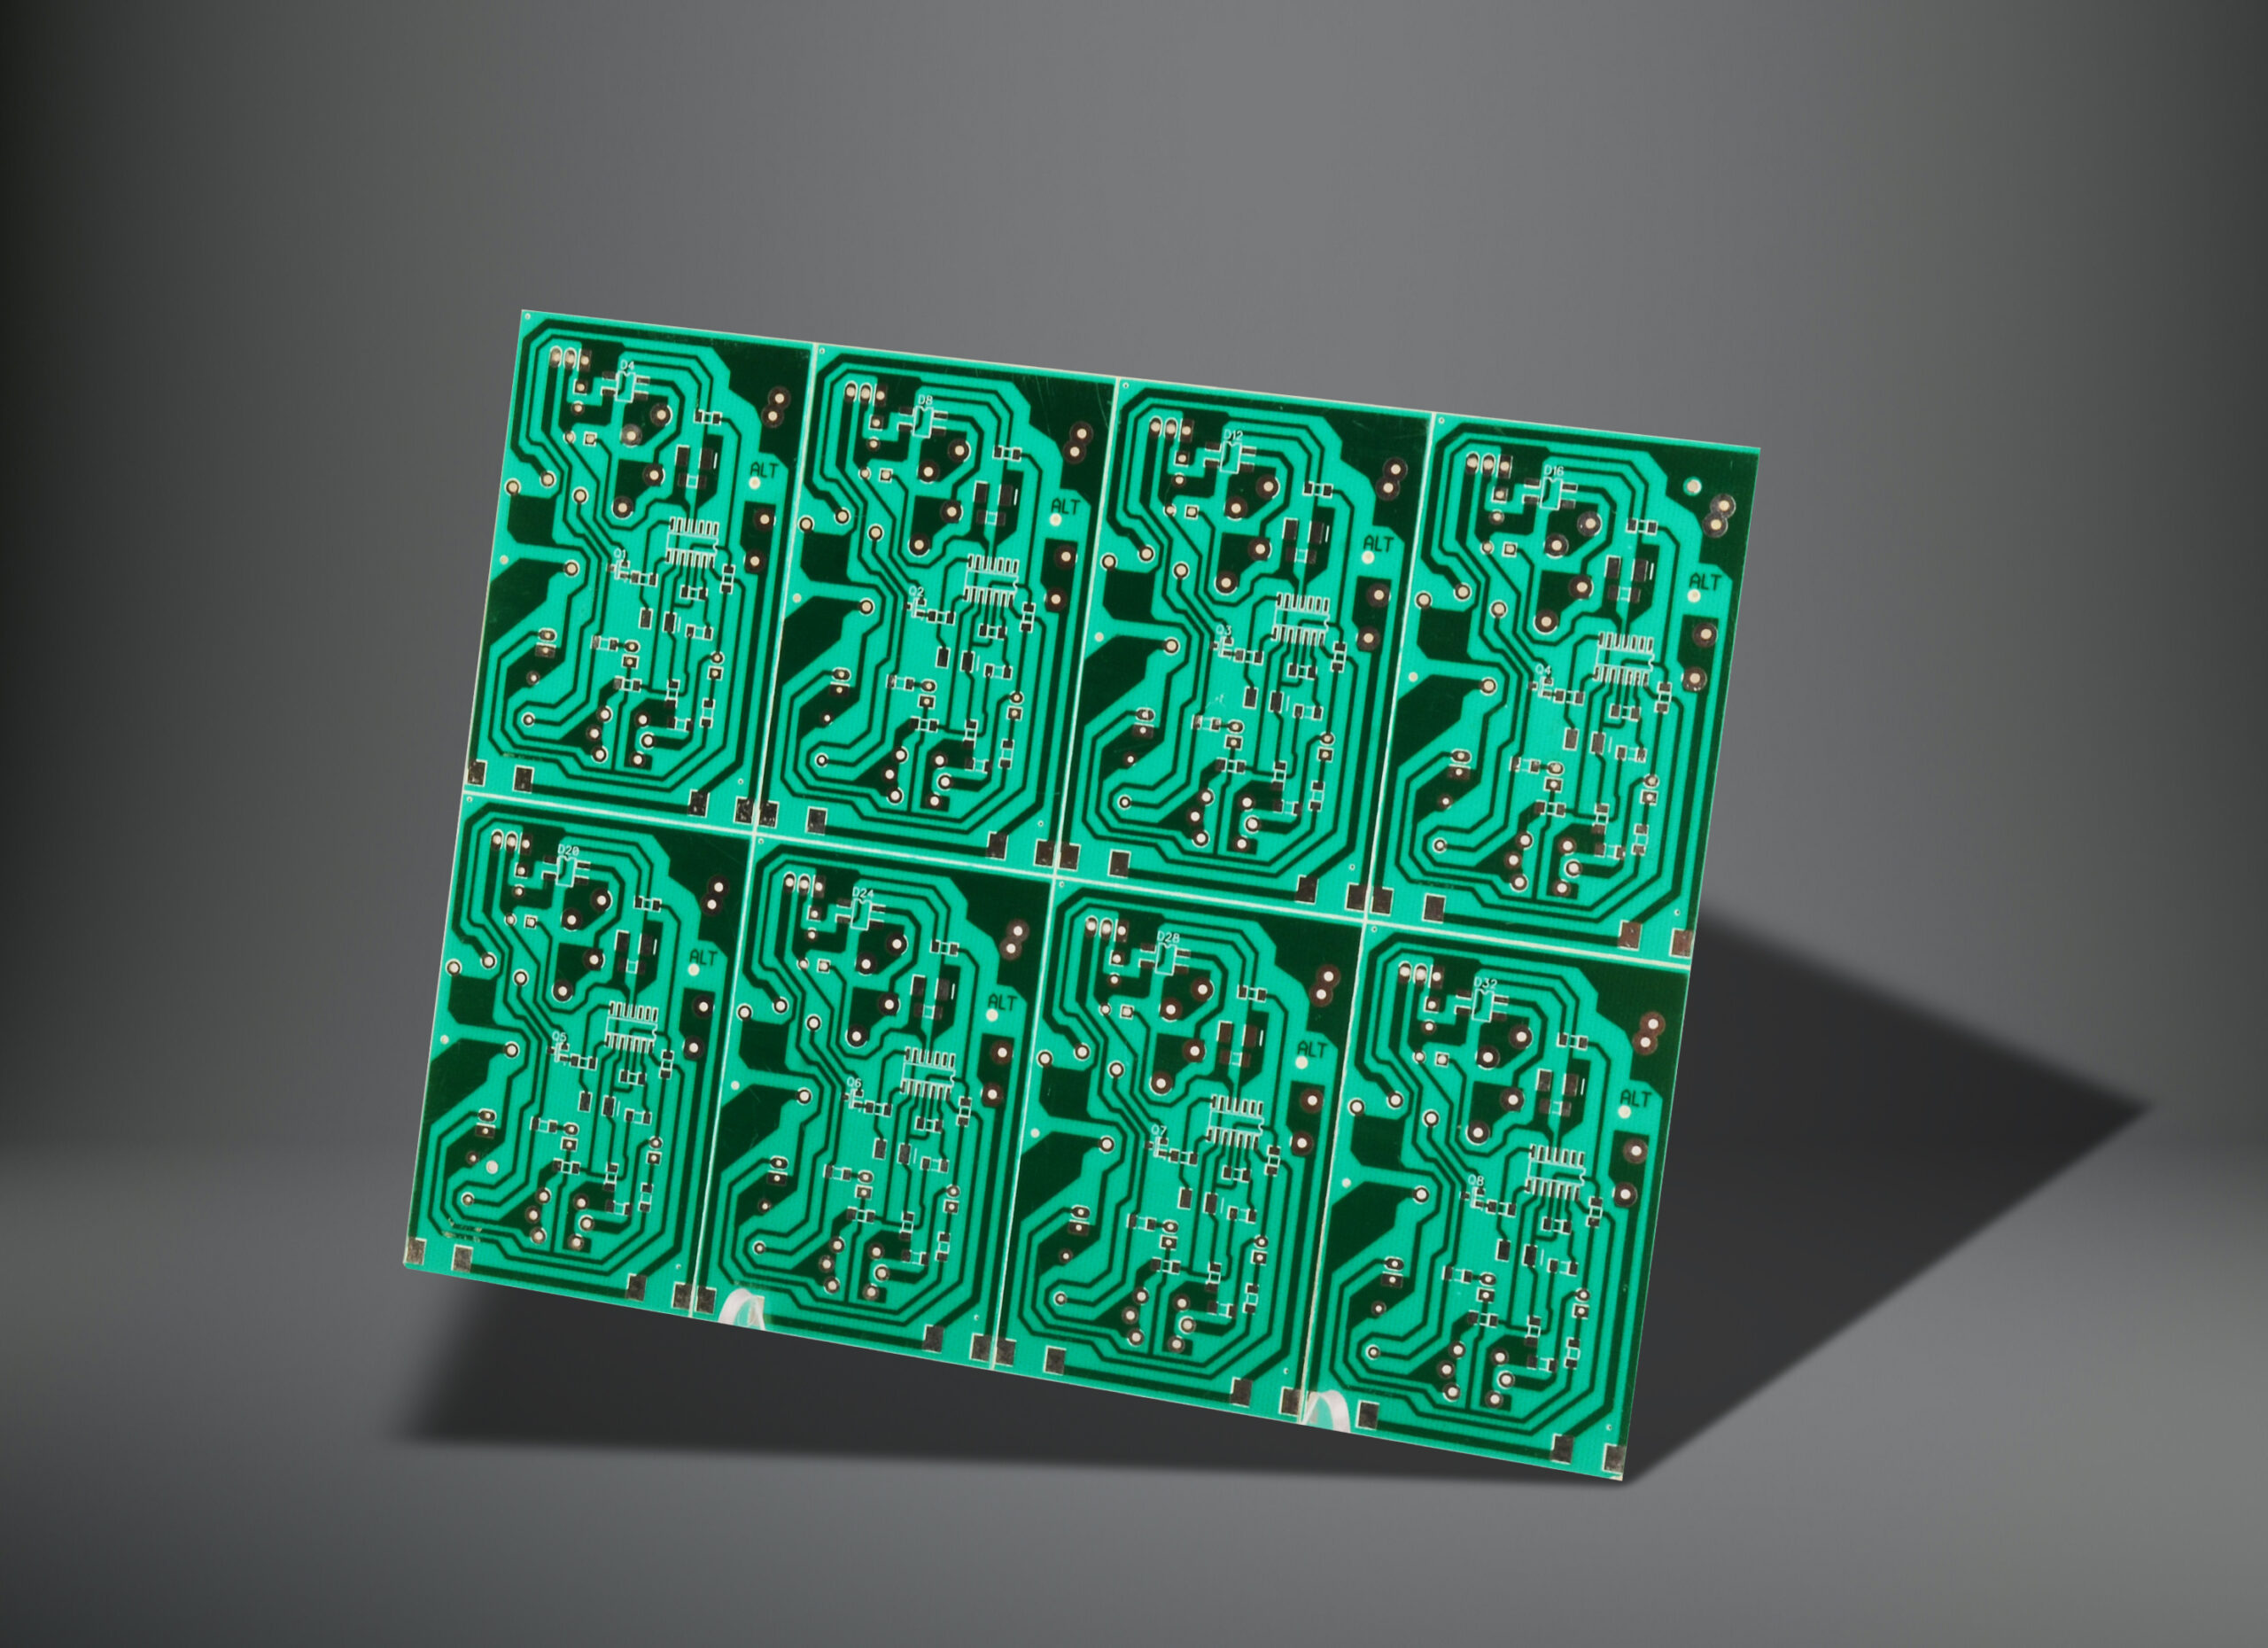 Single-sided and double-sided CEM-3 PCB